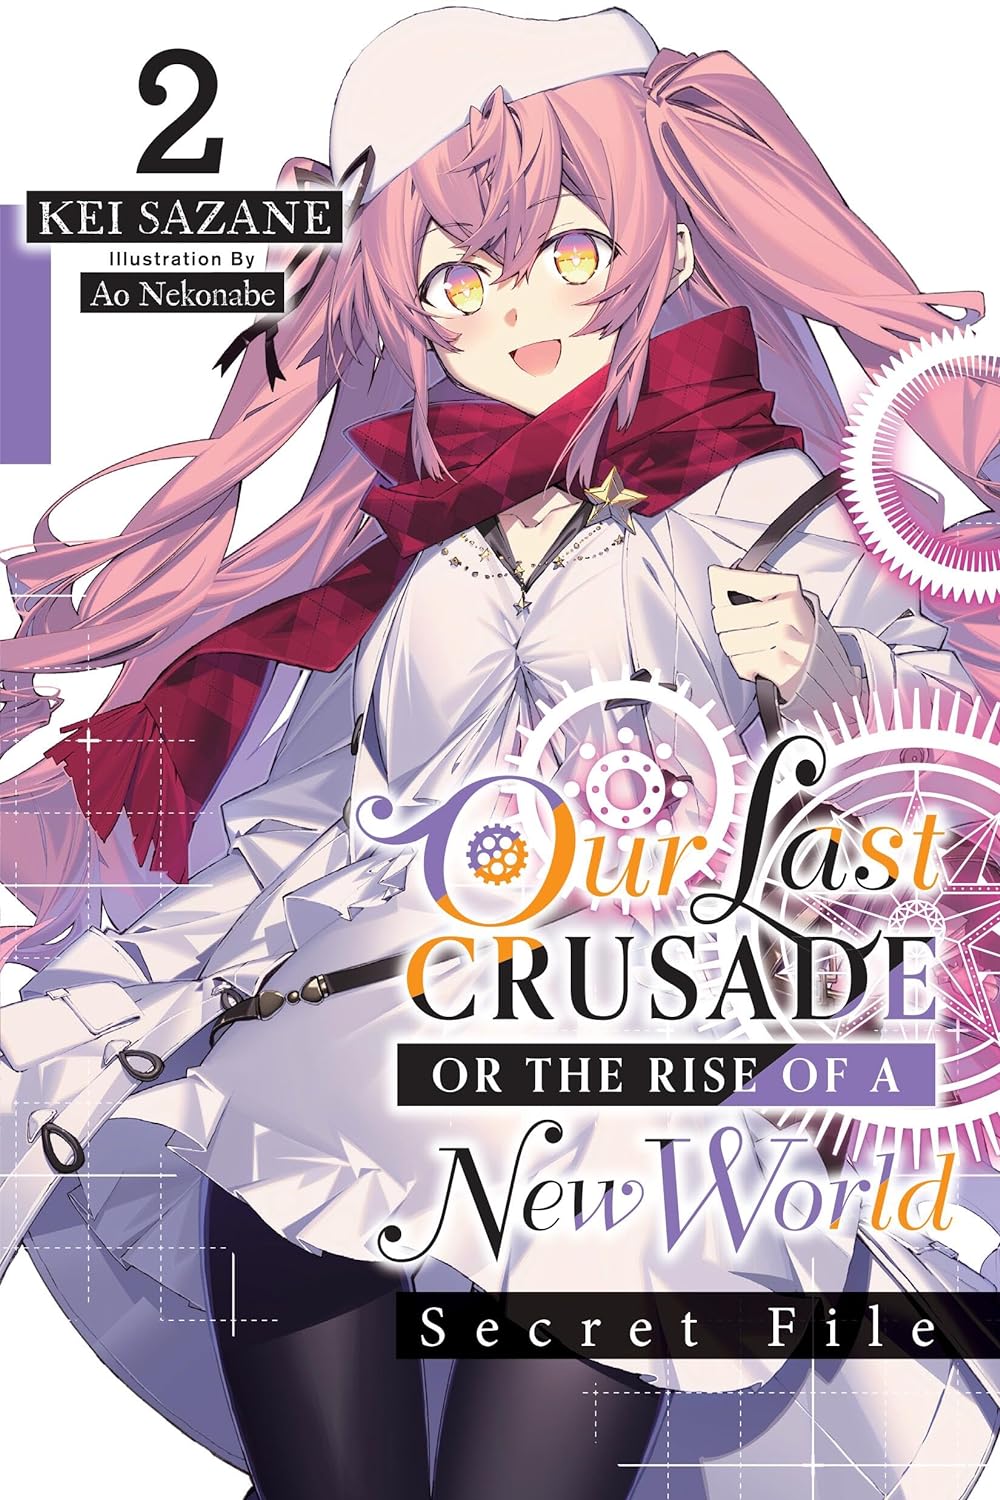 Our Last Crusade or the Rise of a New World: Secret File Vol. 02 (Light Novel)